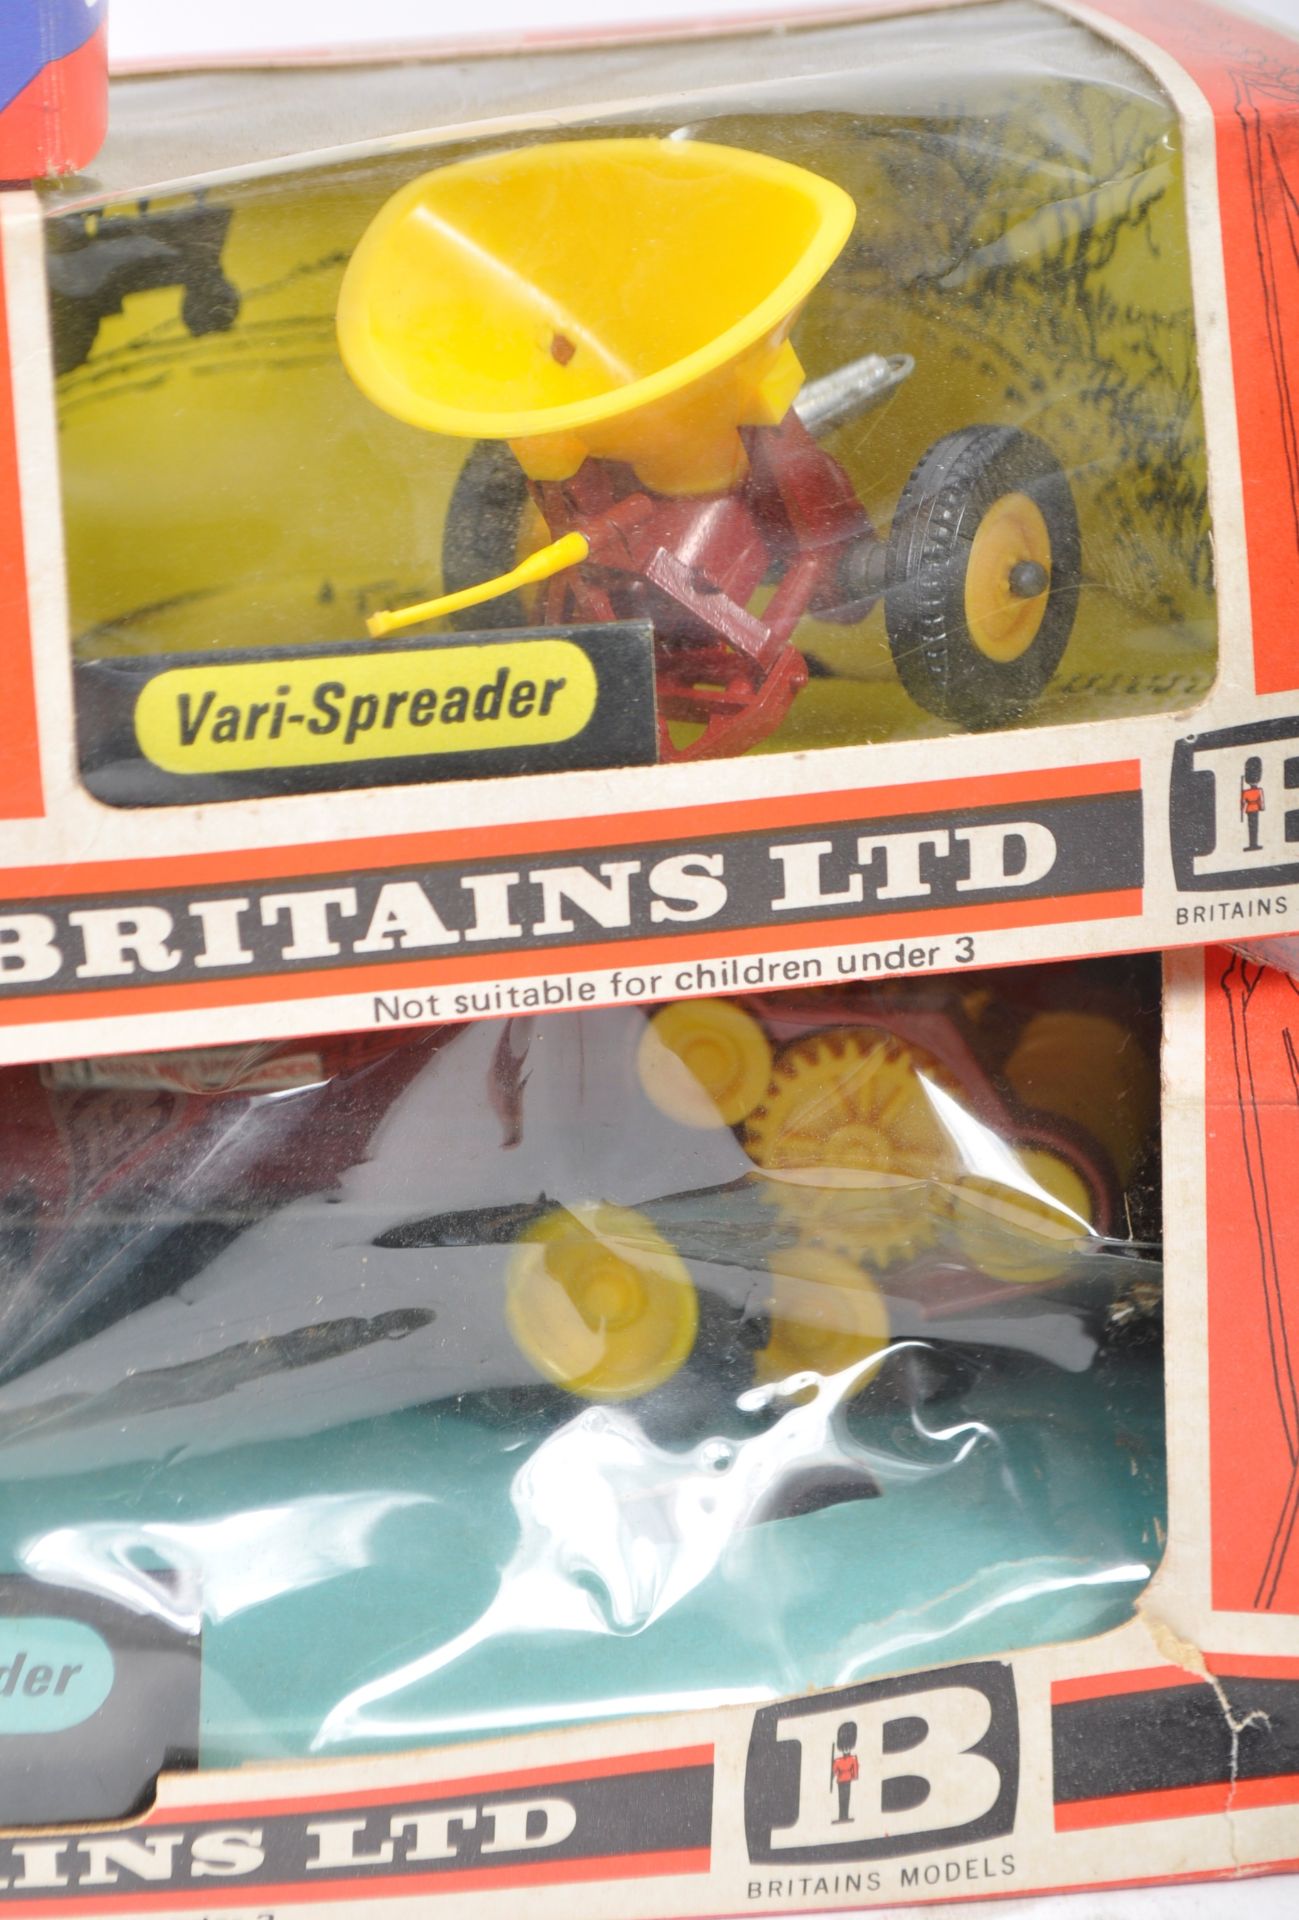 COLLECTION OF BRITAINS FARM SERIES DIECAST MODELS - Image 2 of 5